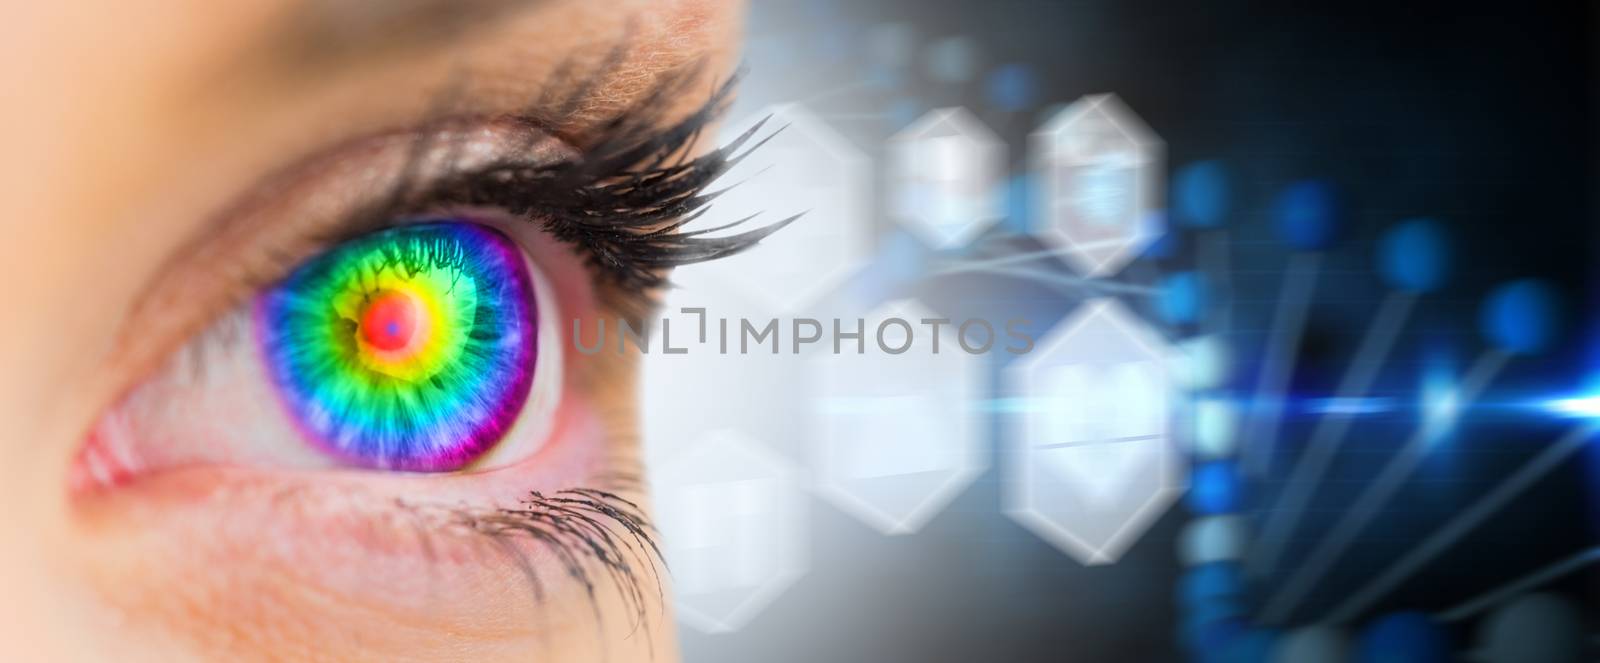 Composite image of psychedelic eye looking ahead on female face by Wavebreakmedia